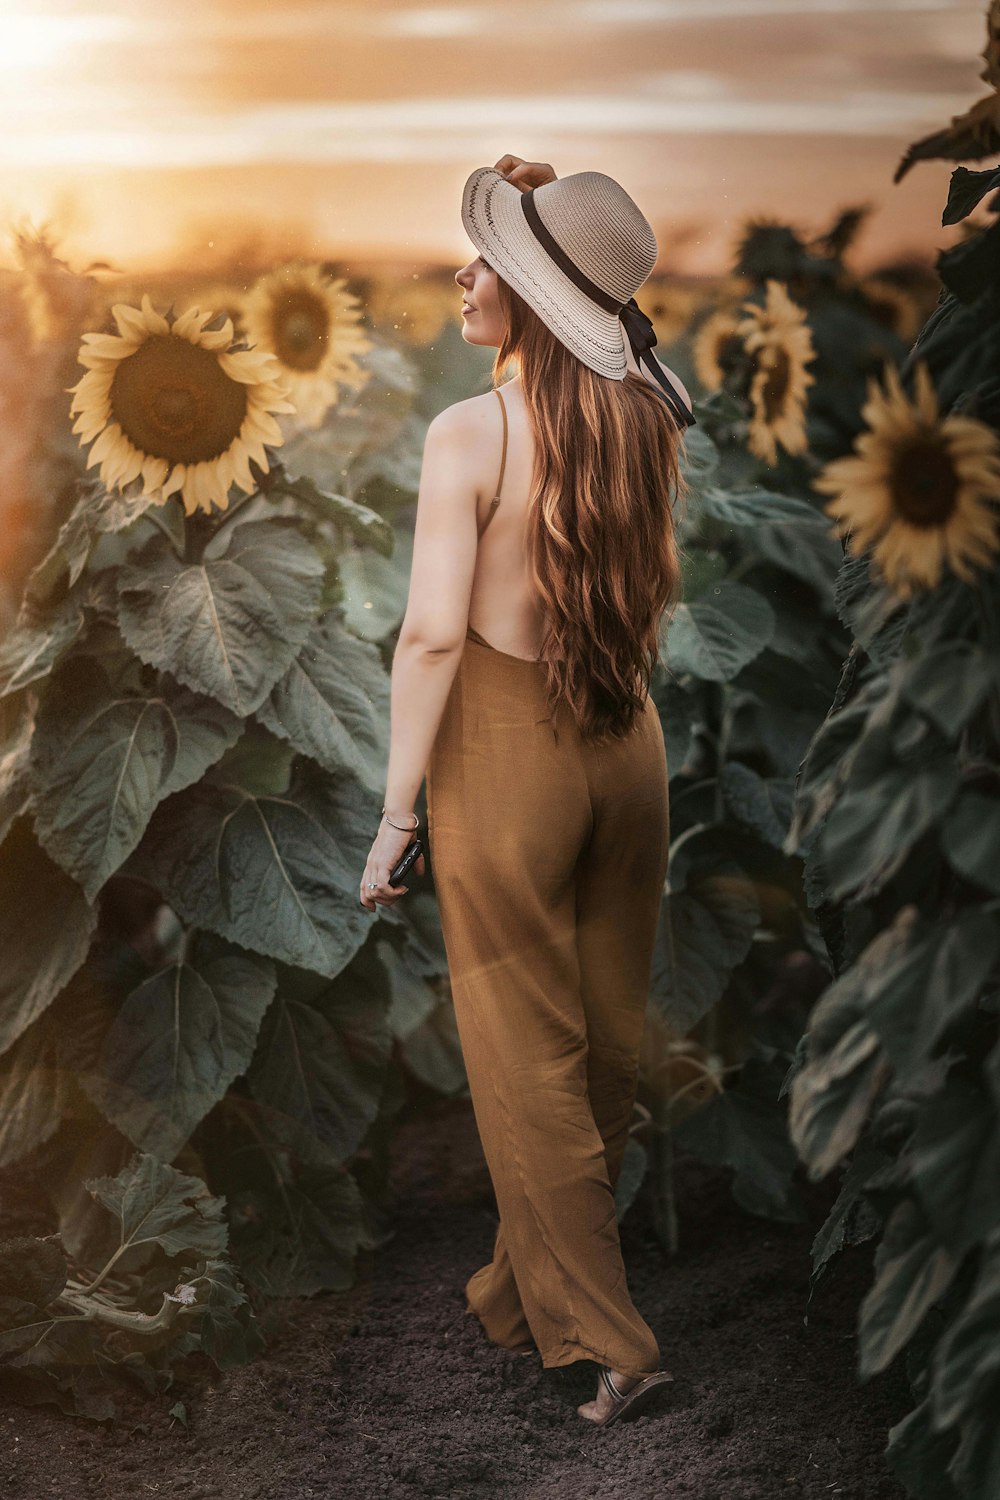 woman in brown sleeveless dress standing on sunflower field during daytime